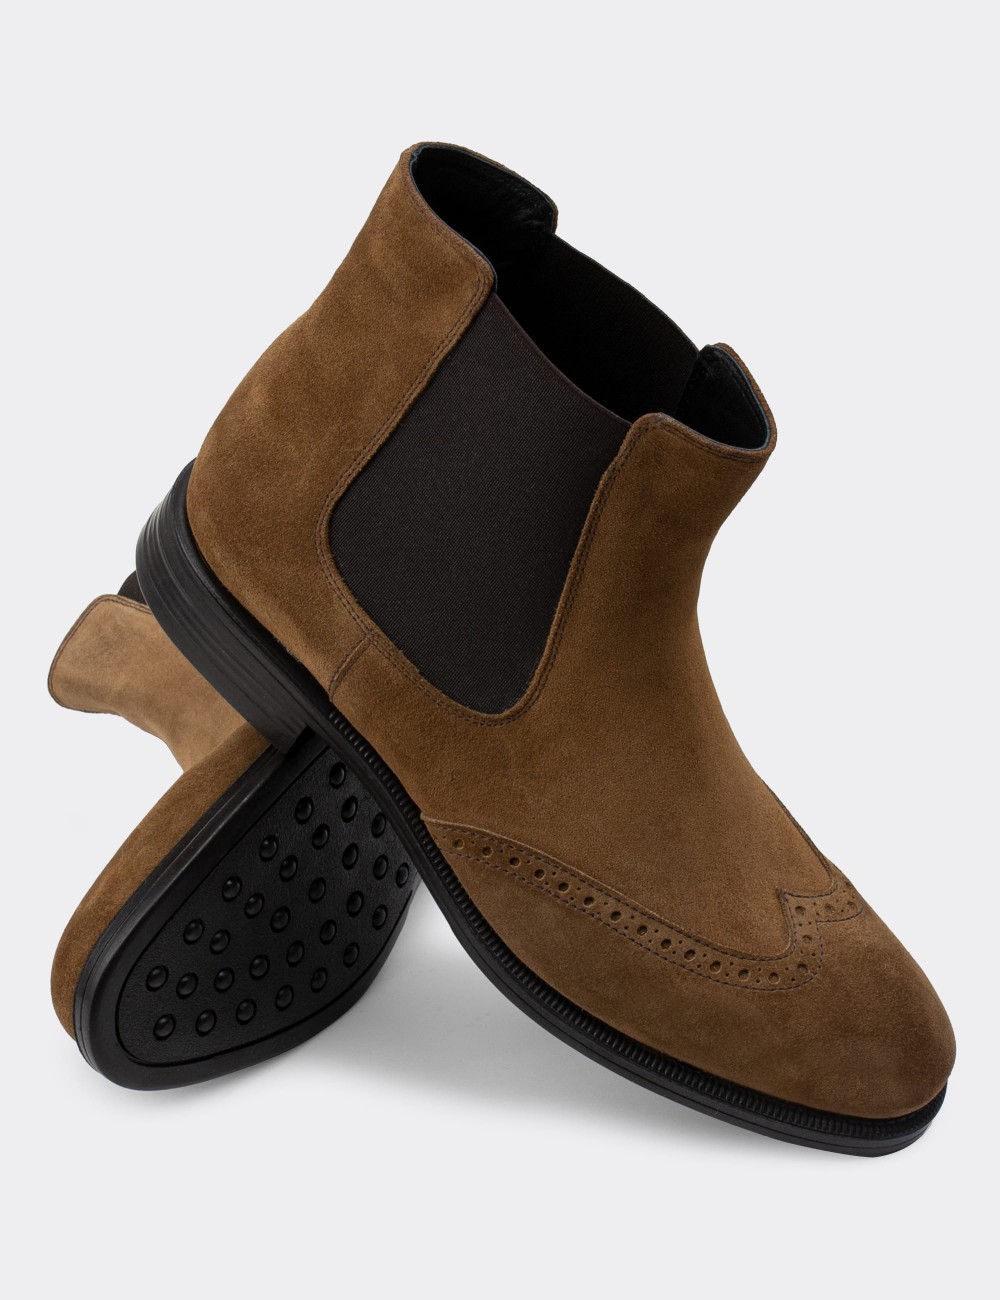 Tan Suede Leather Chelsea Boots - 01848MTBAC01